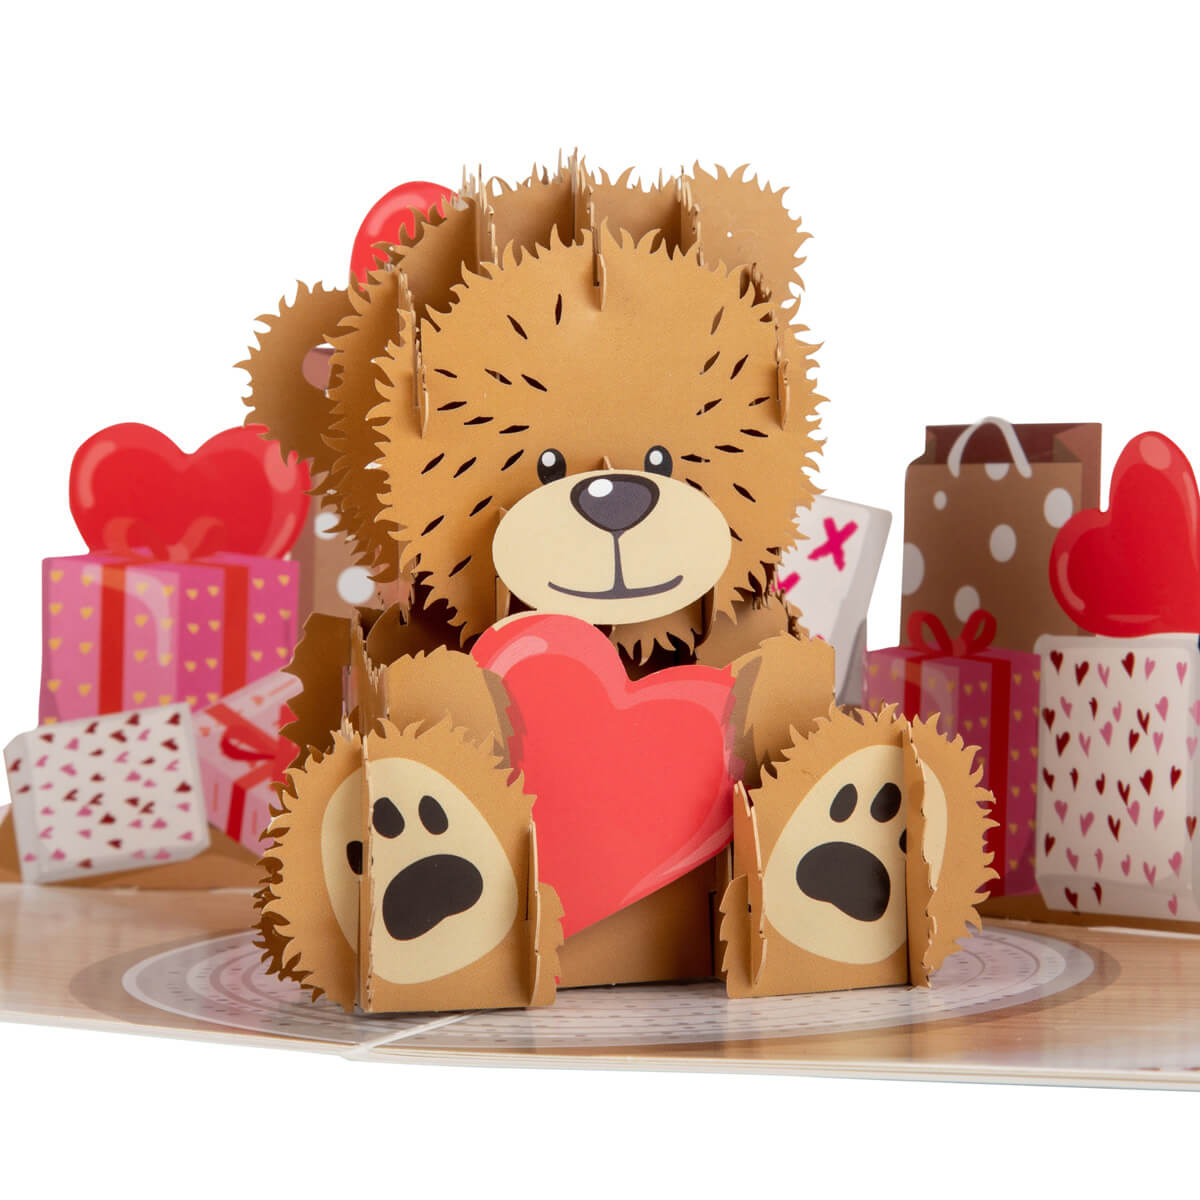 Close up image of Cardology Valentines Day Card or Anniversary Card.  Love Bear Pop Up Card featuring a 3D teddy bear holding a red heart.